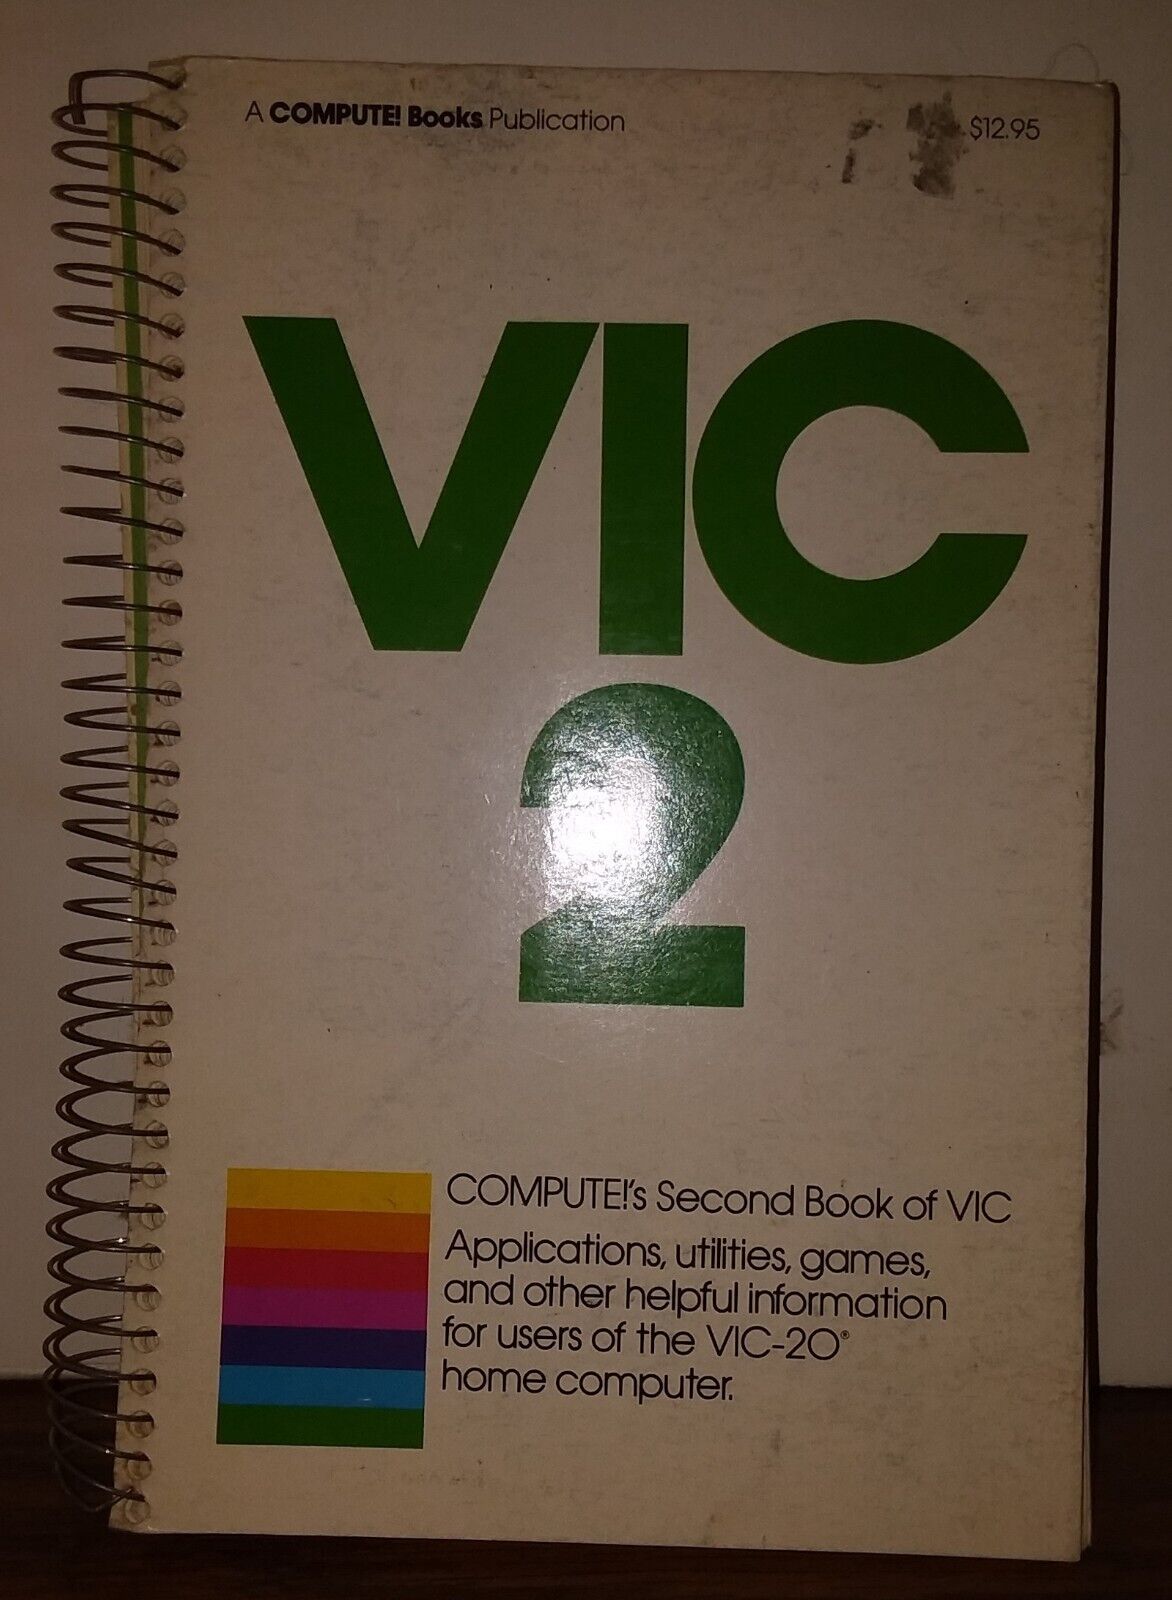 Commodore VIC-20 Book - Compute's Second Book of VIC - VIC 2 - 1983 Vintage